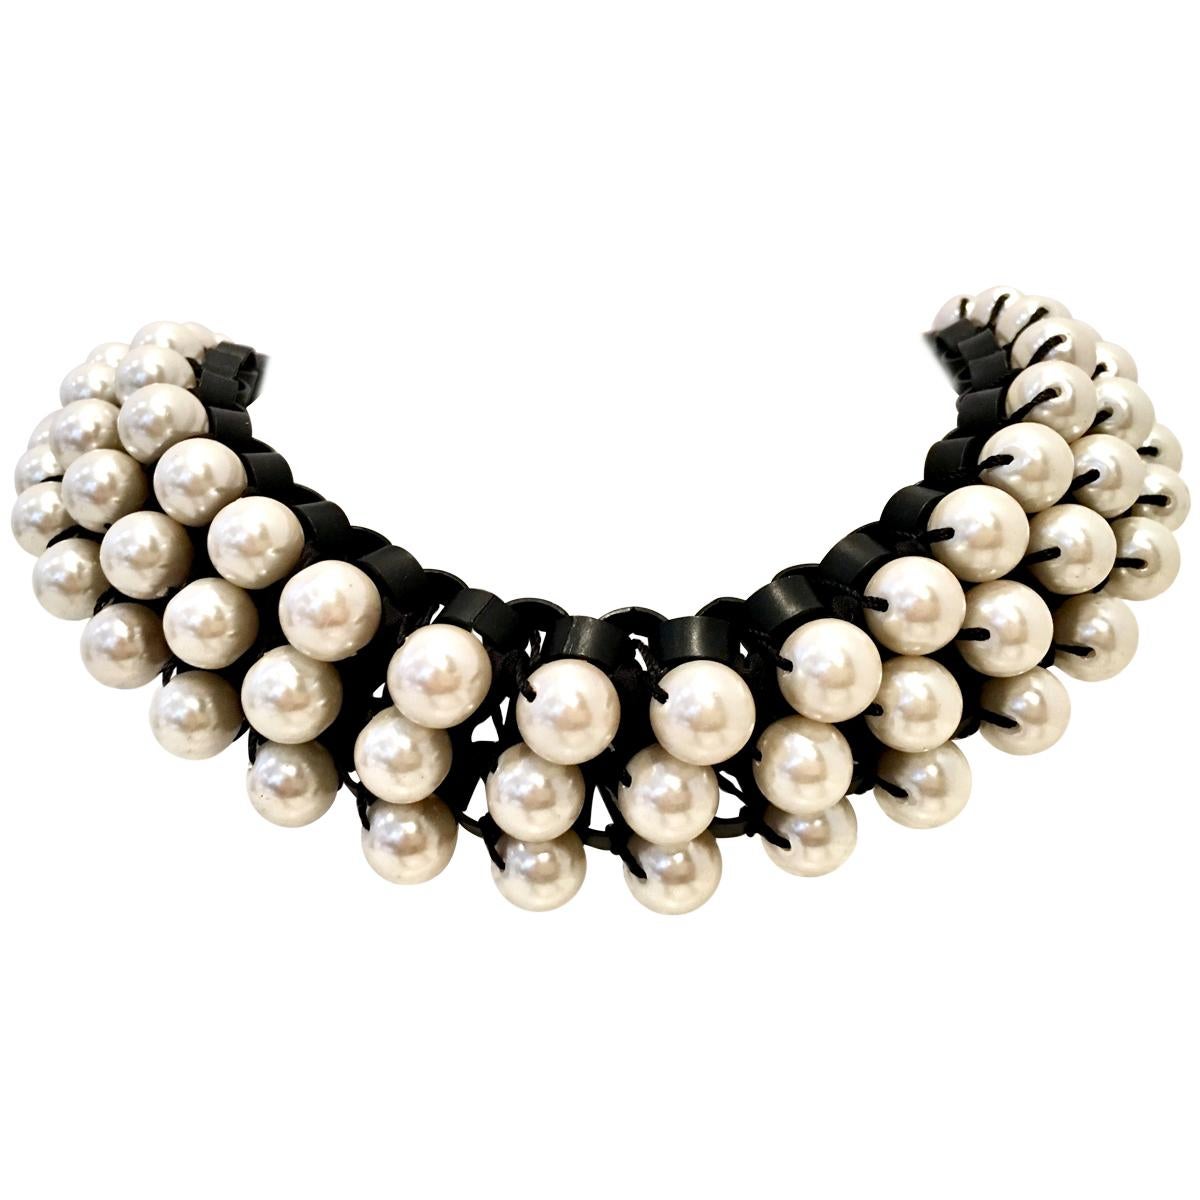 21st Century Leather & Faux Pearl Choker Style Necklace By, Lee Angel